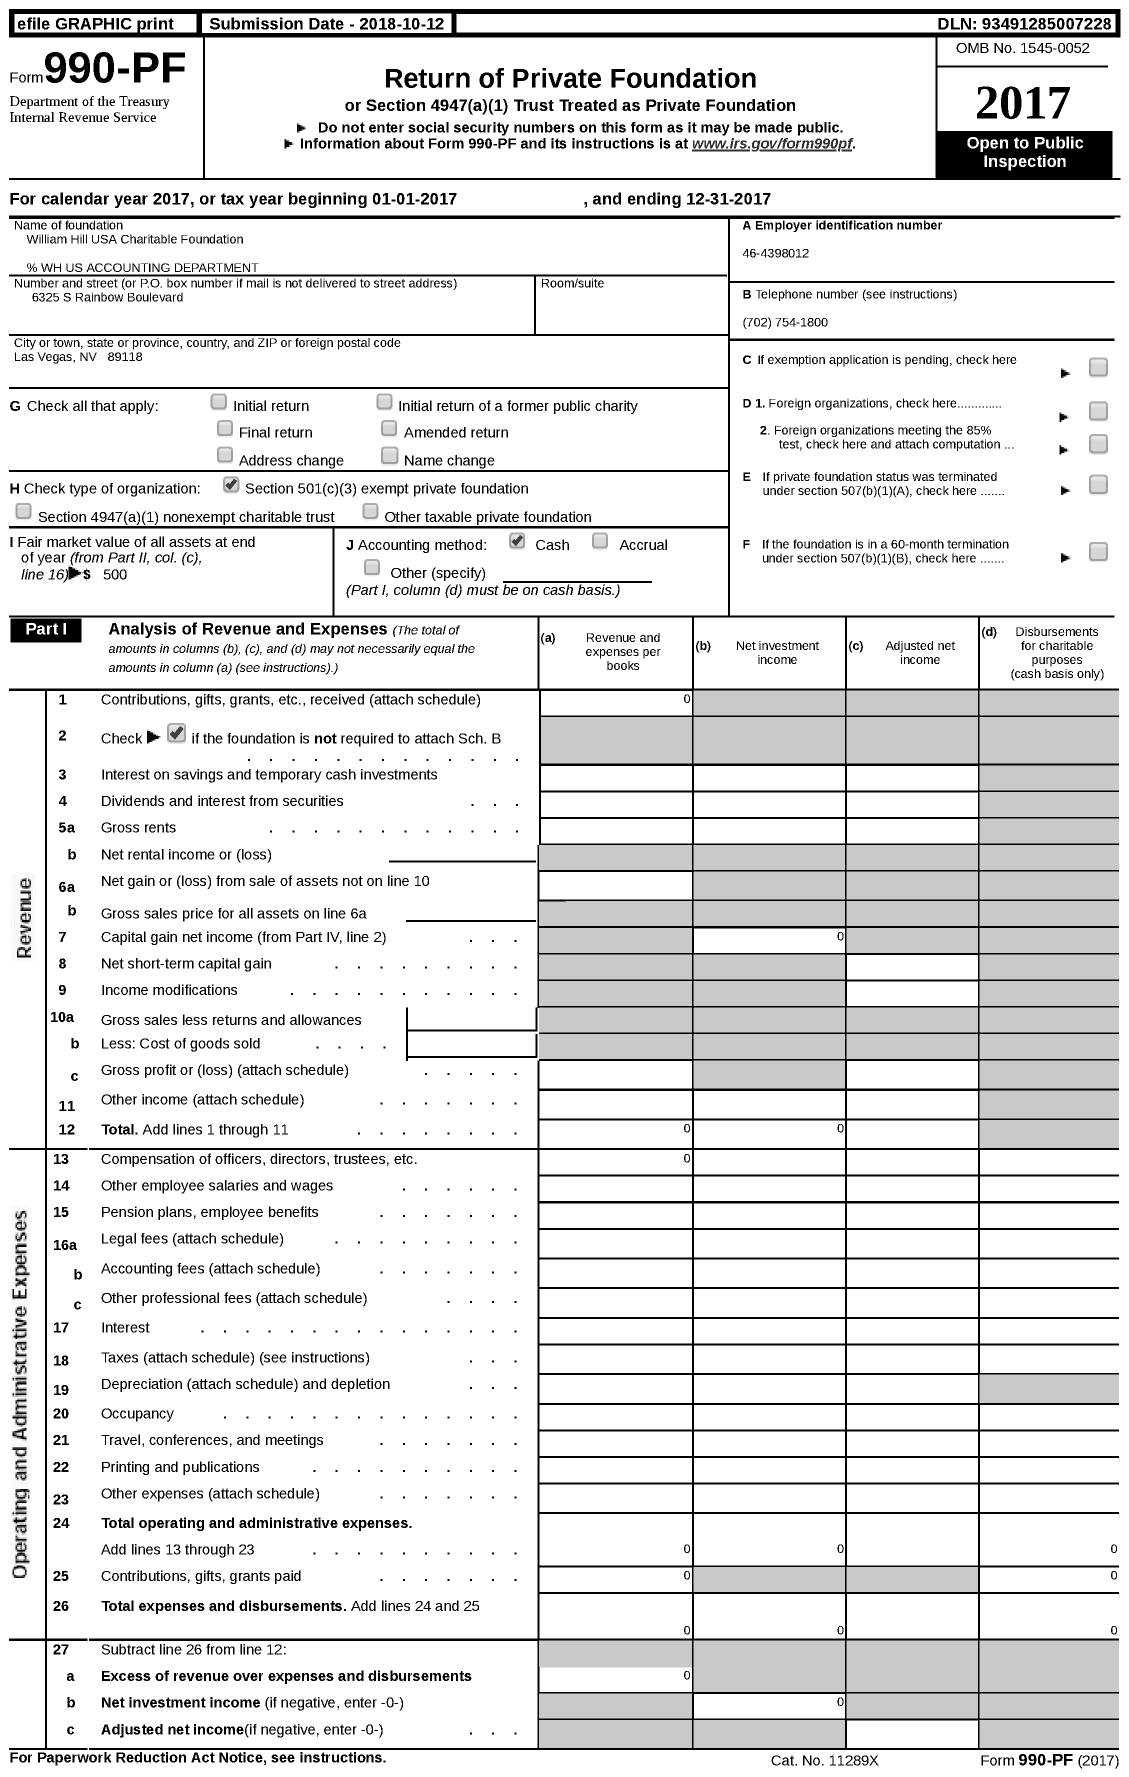 Image of first page of 2017 Form 990PF for WHUS Charitable Foundation